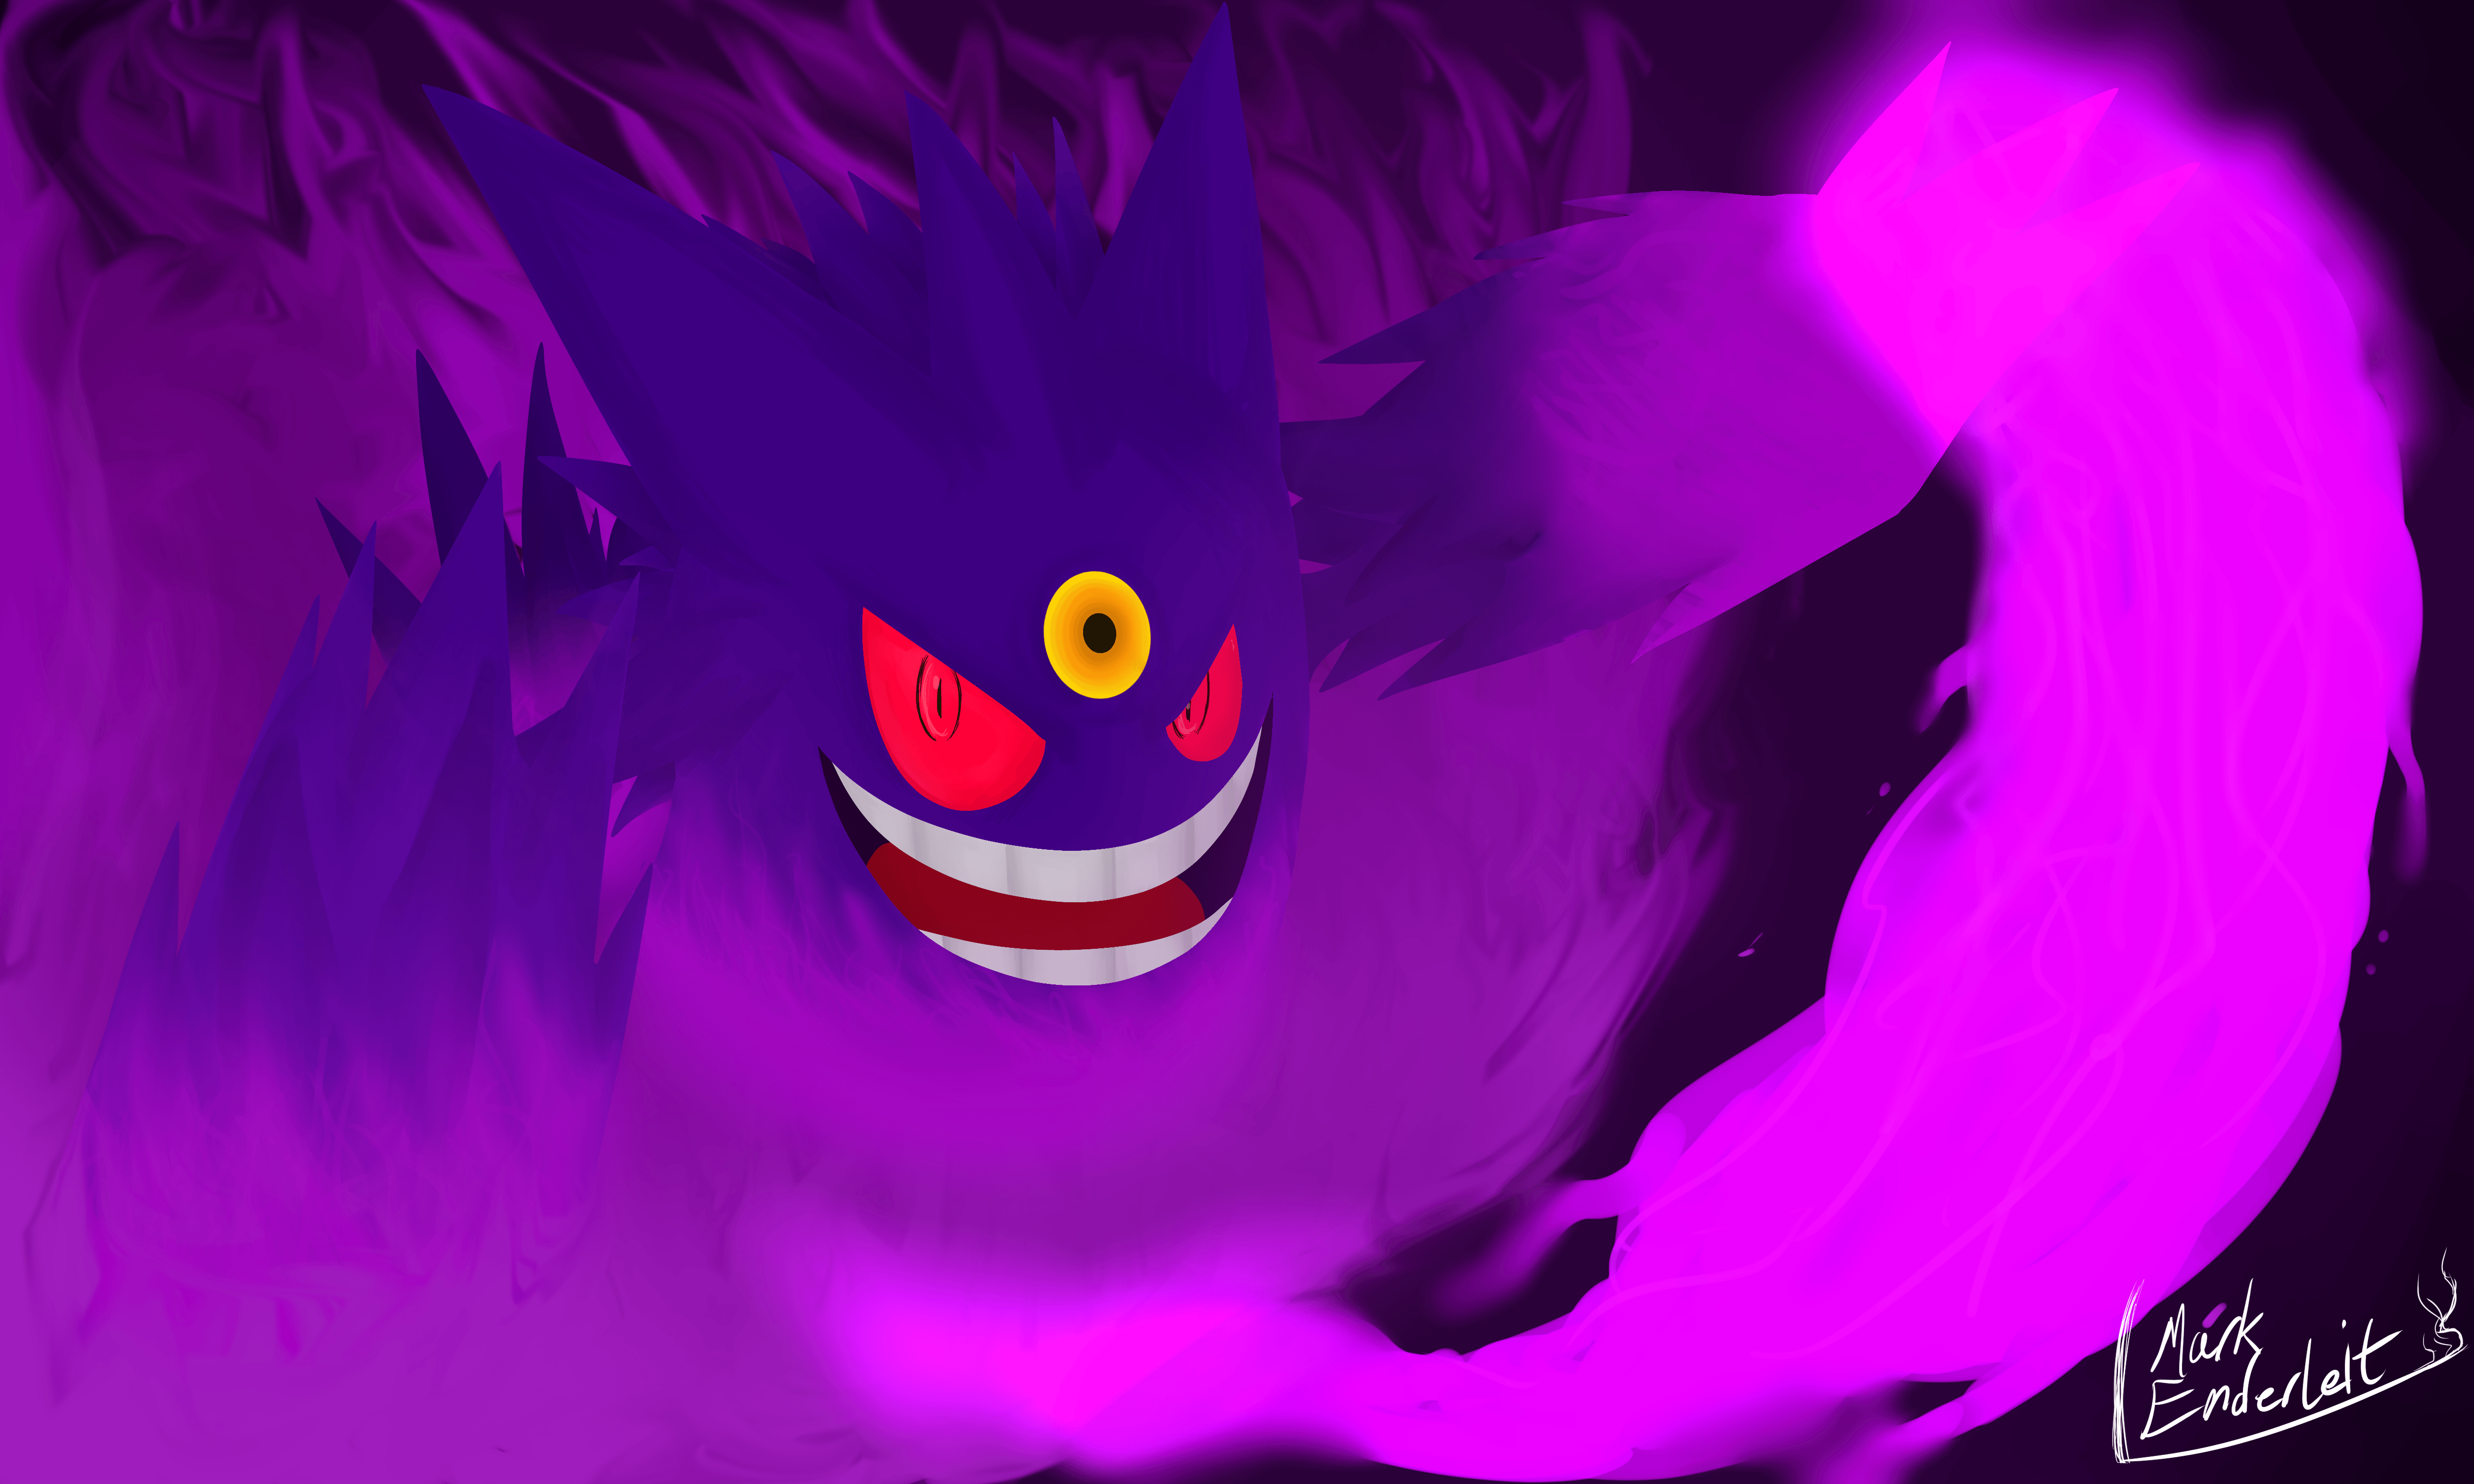 Download Gengar Pokémon wallpapers for mobile phone free Gengar  Pokémon HD pictures